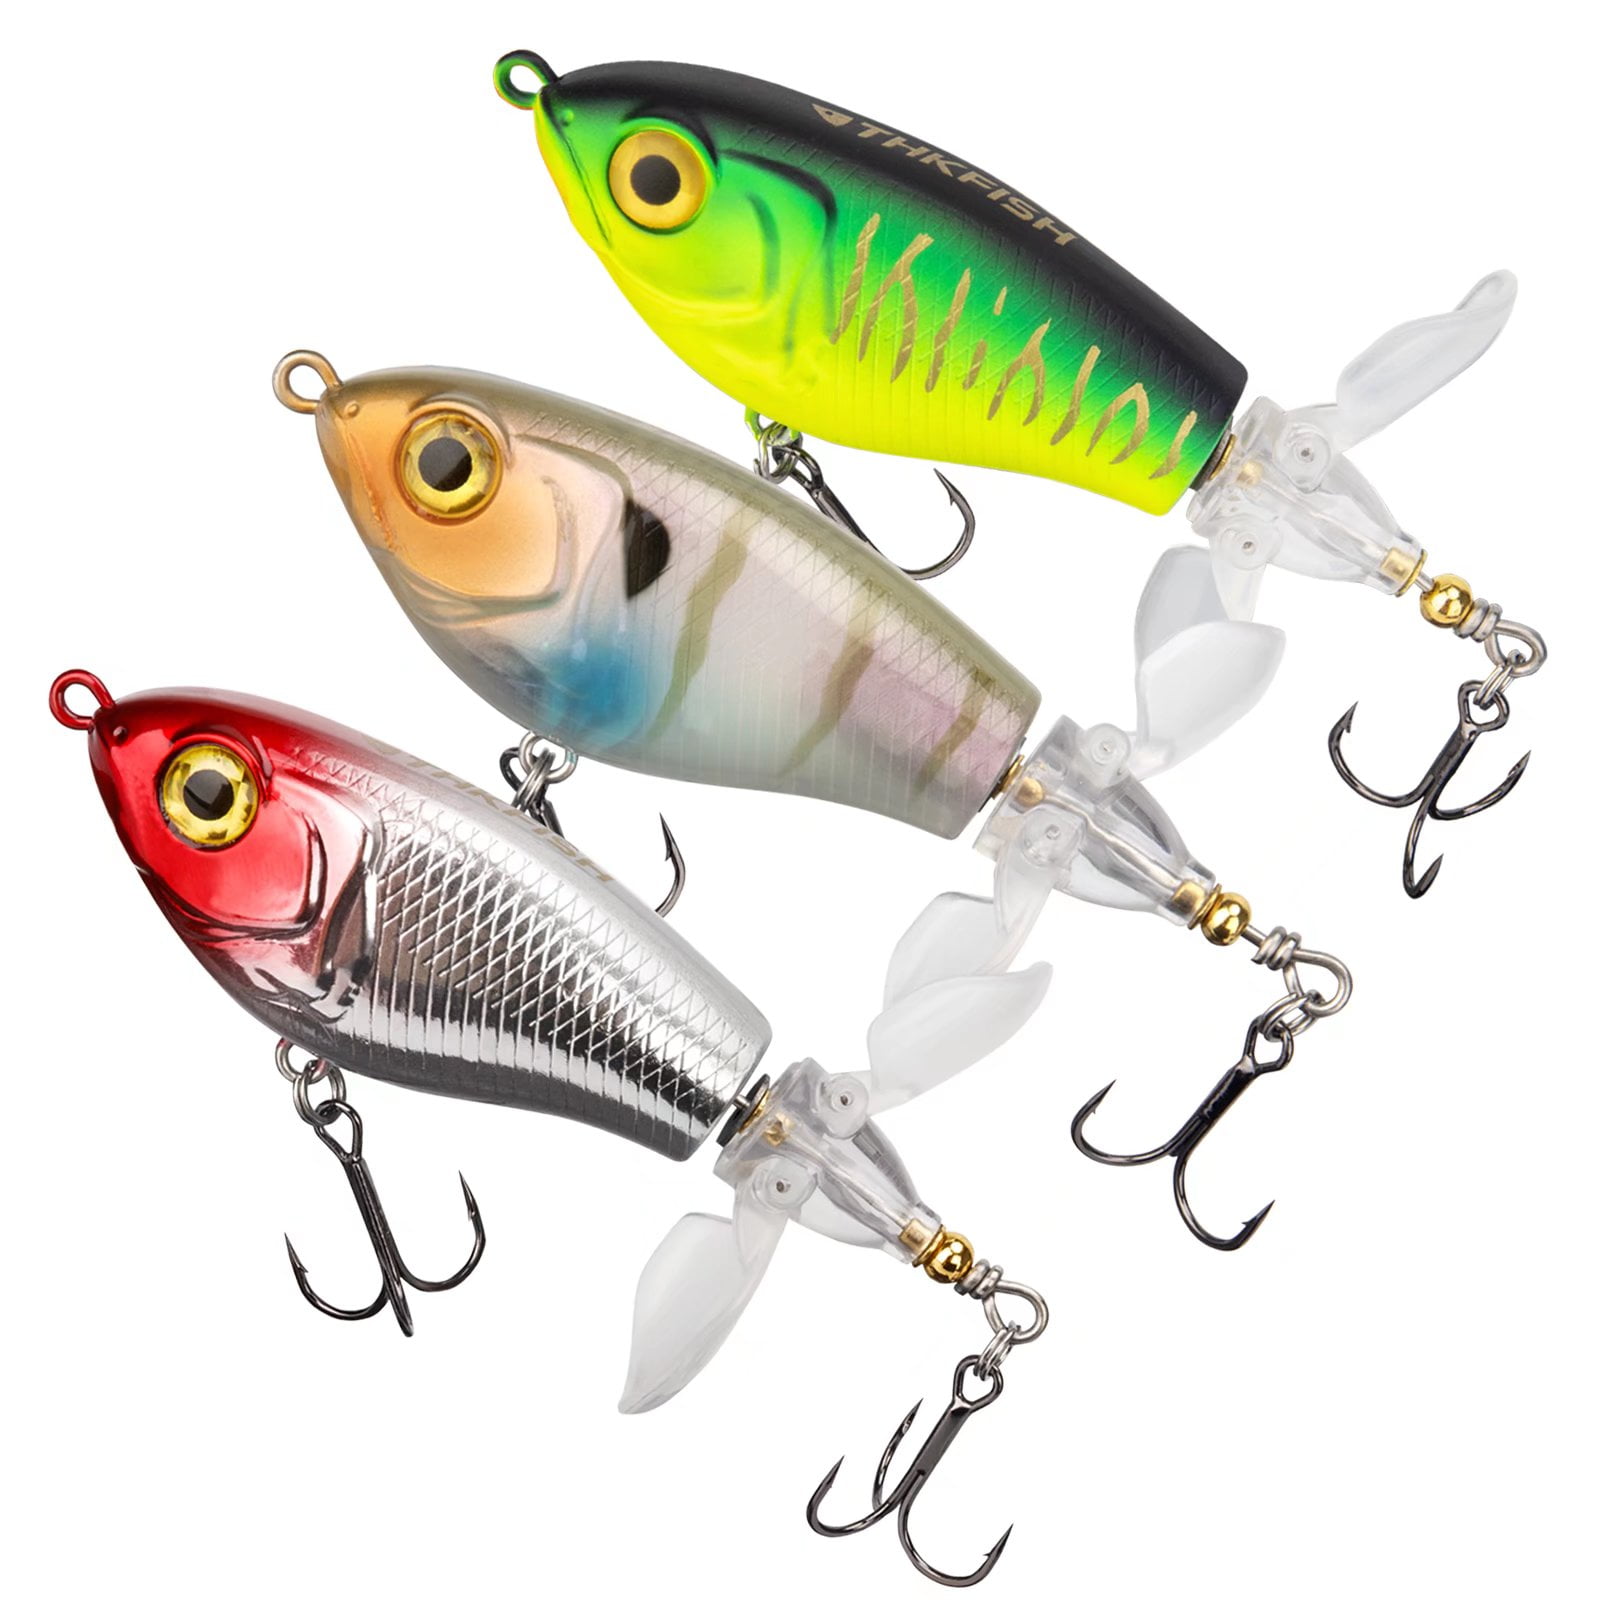 7pc Metal VIB Fishing Lures 7-21g Spinner Blade Bass Walleyes with Treble Hooks